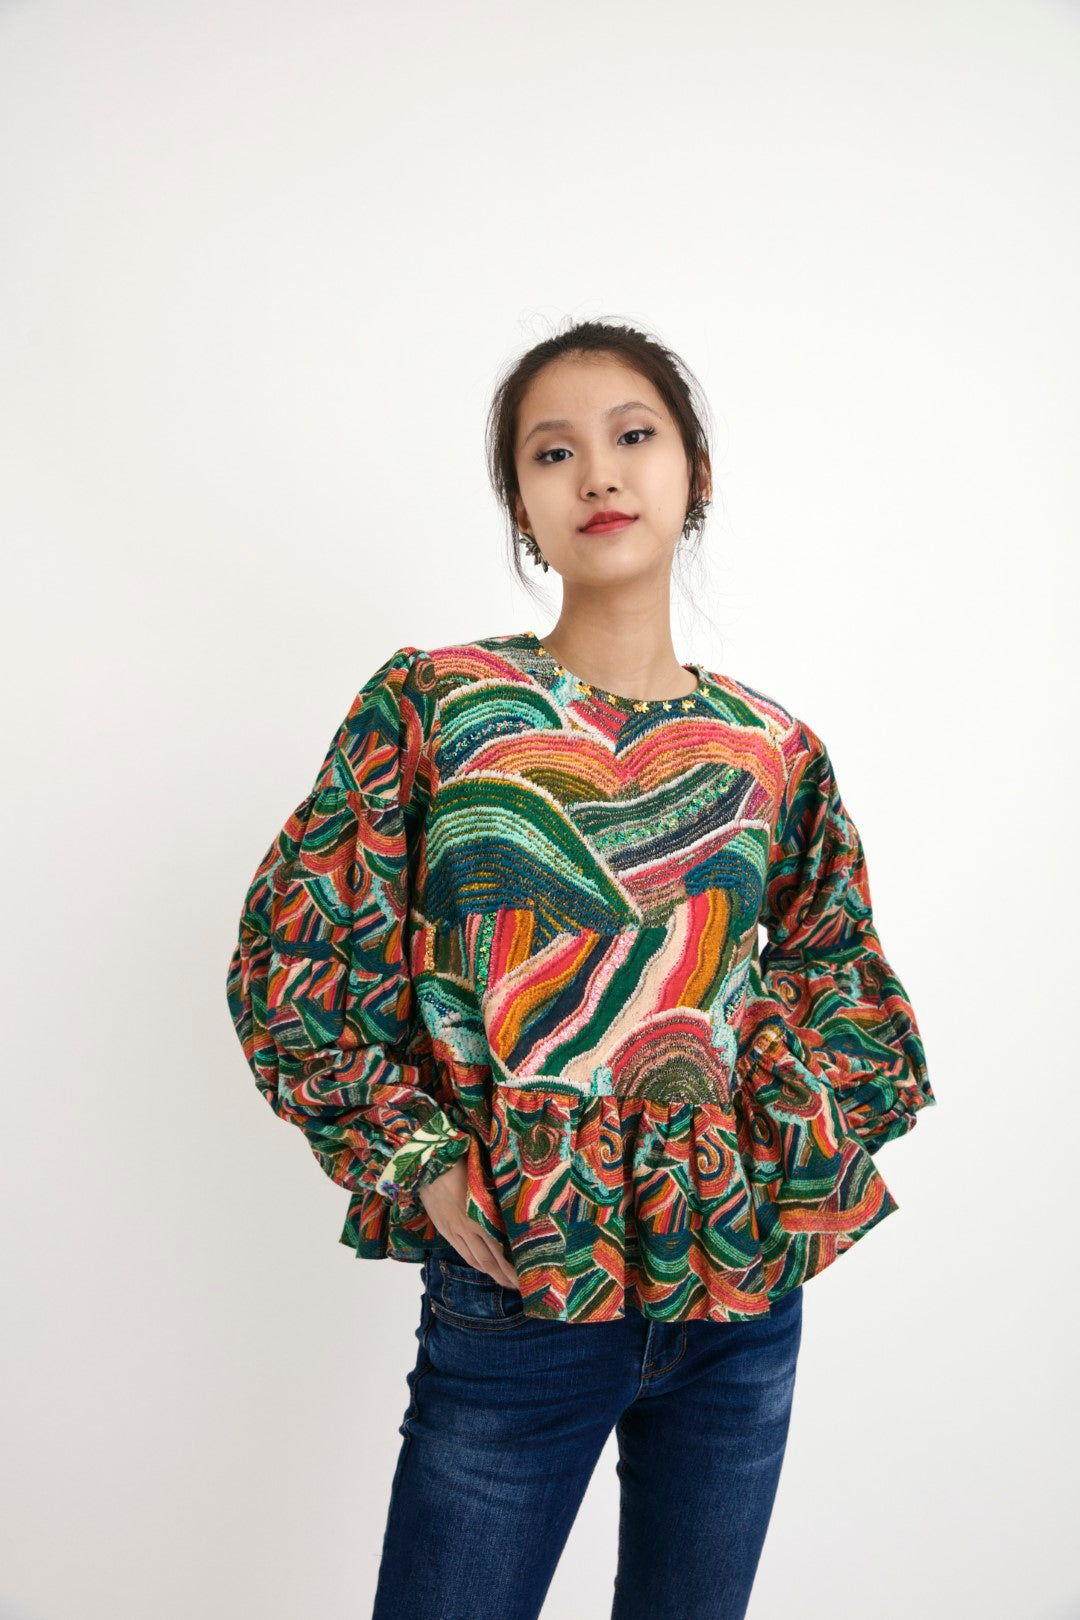 "Handpainted iconic ocean wave multi-color cotton frill top with hand-embroidered with sequins, beads, and flower details. 100% Handwoven cotton silk; Lining: 100% cotton 100% Azo Free Dry Clean Only"